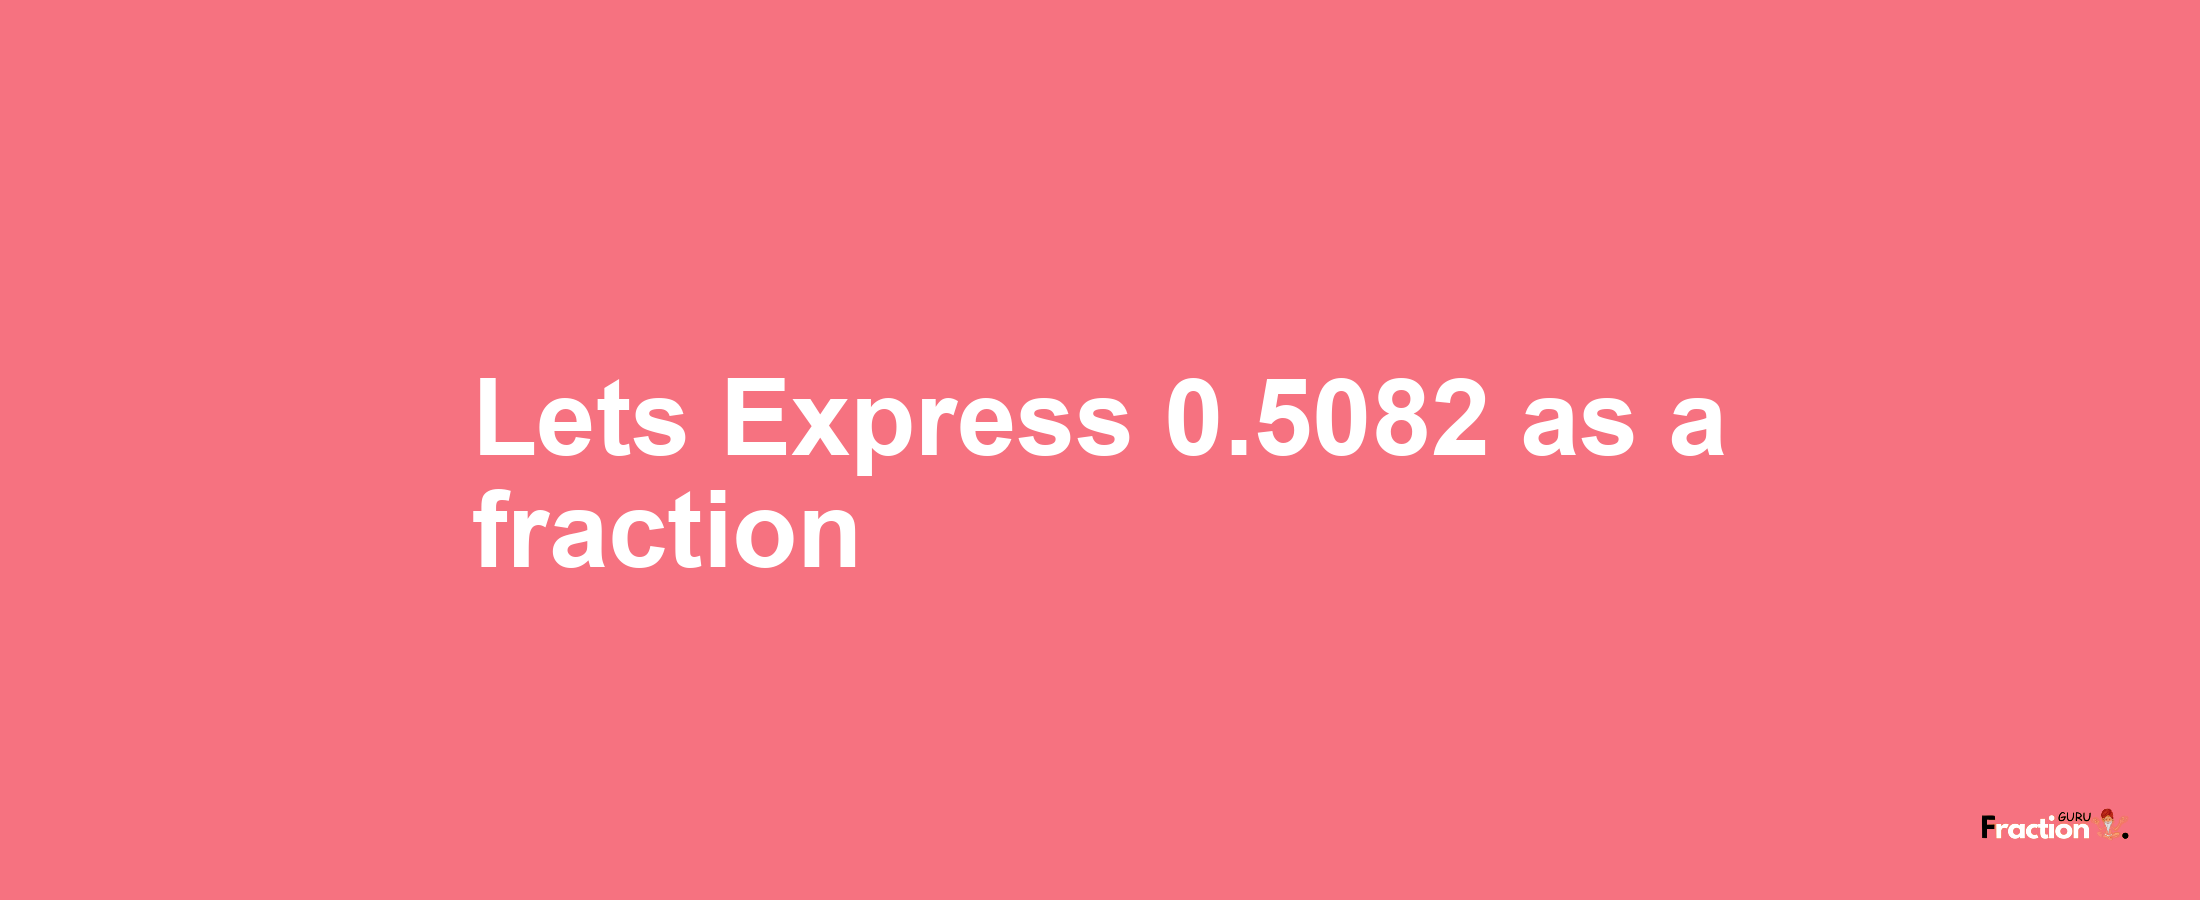 Lets Express 0.5082 as afraction